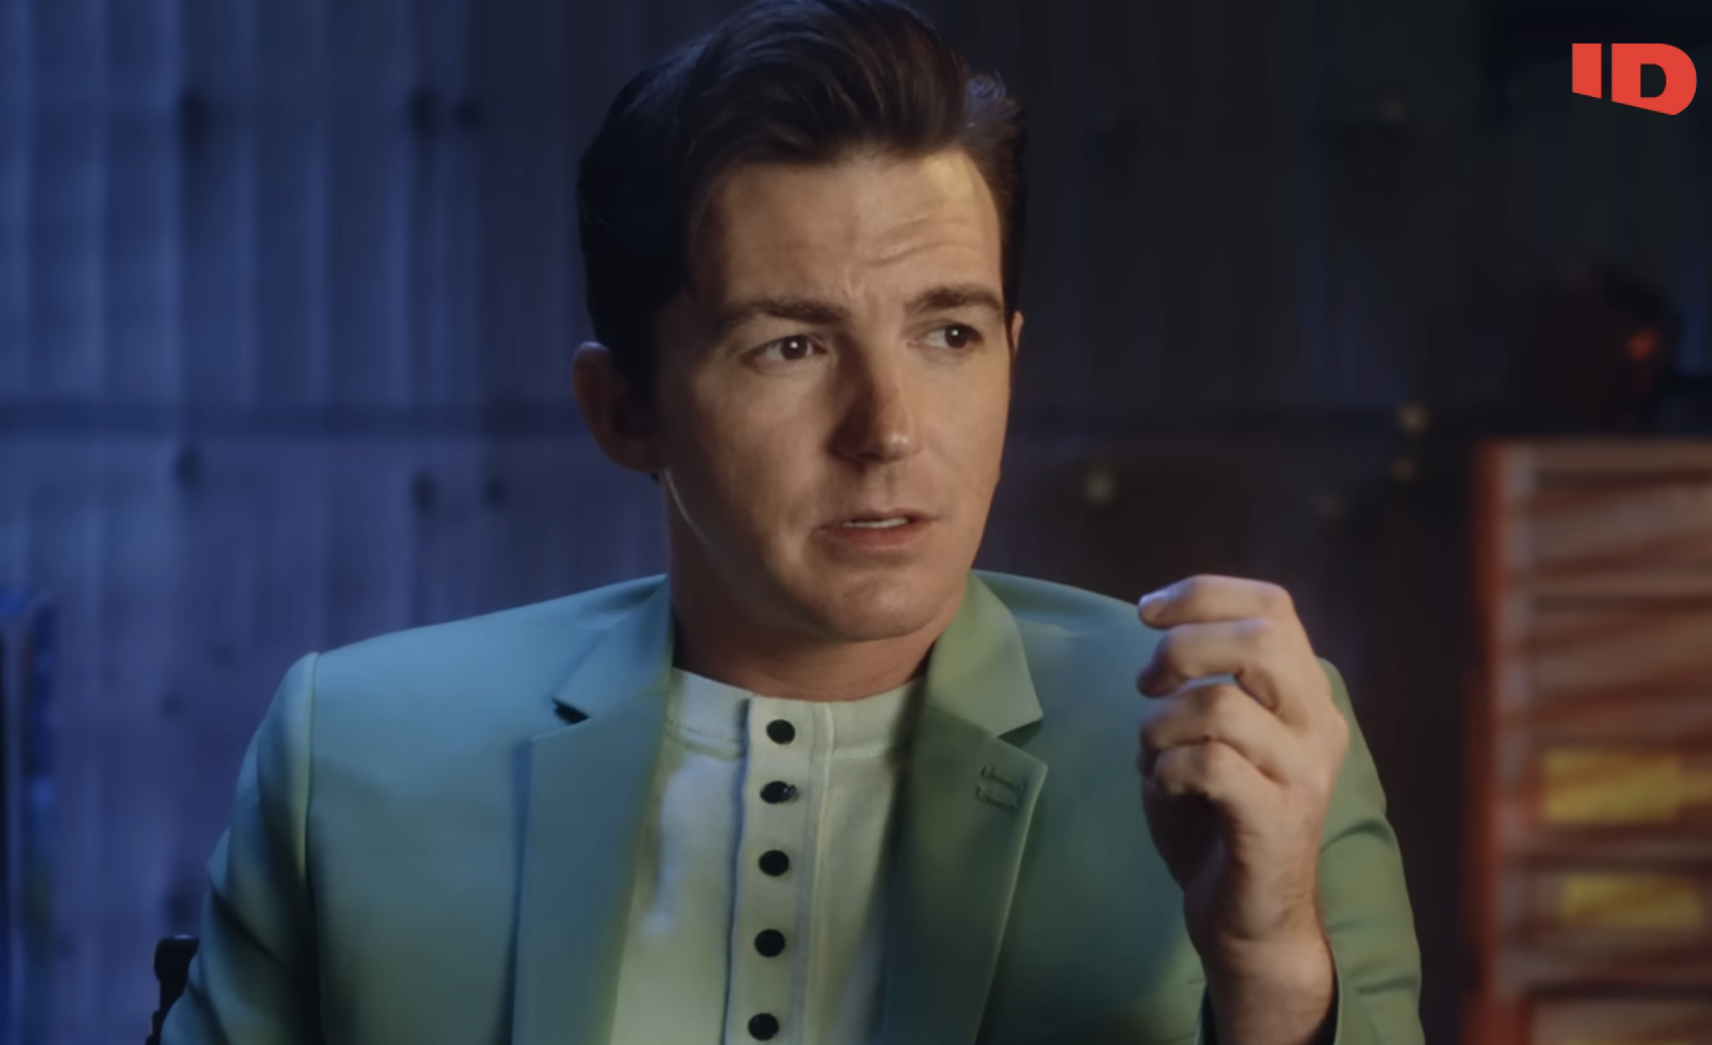 Drake Bell sits for an interview, wearing a green jacket and white shirt, with a microphone clipped on